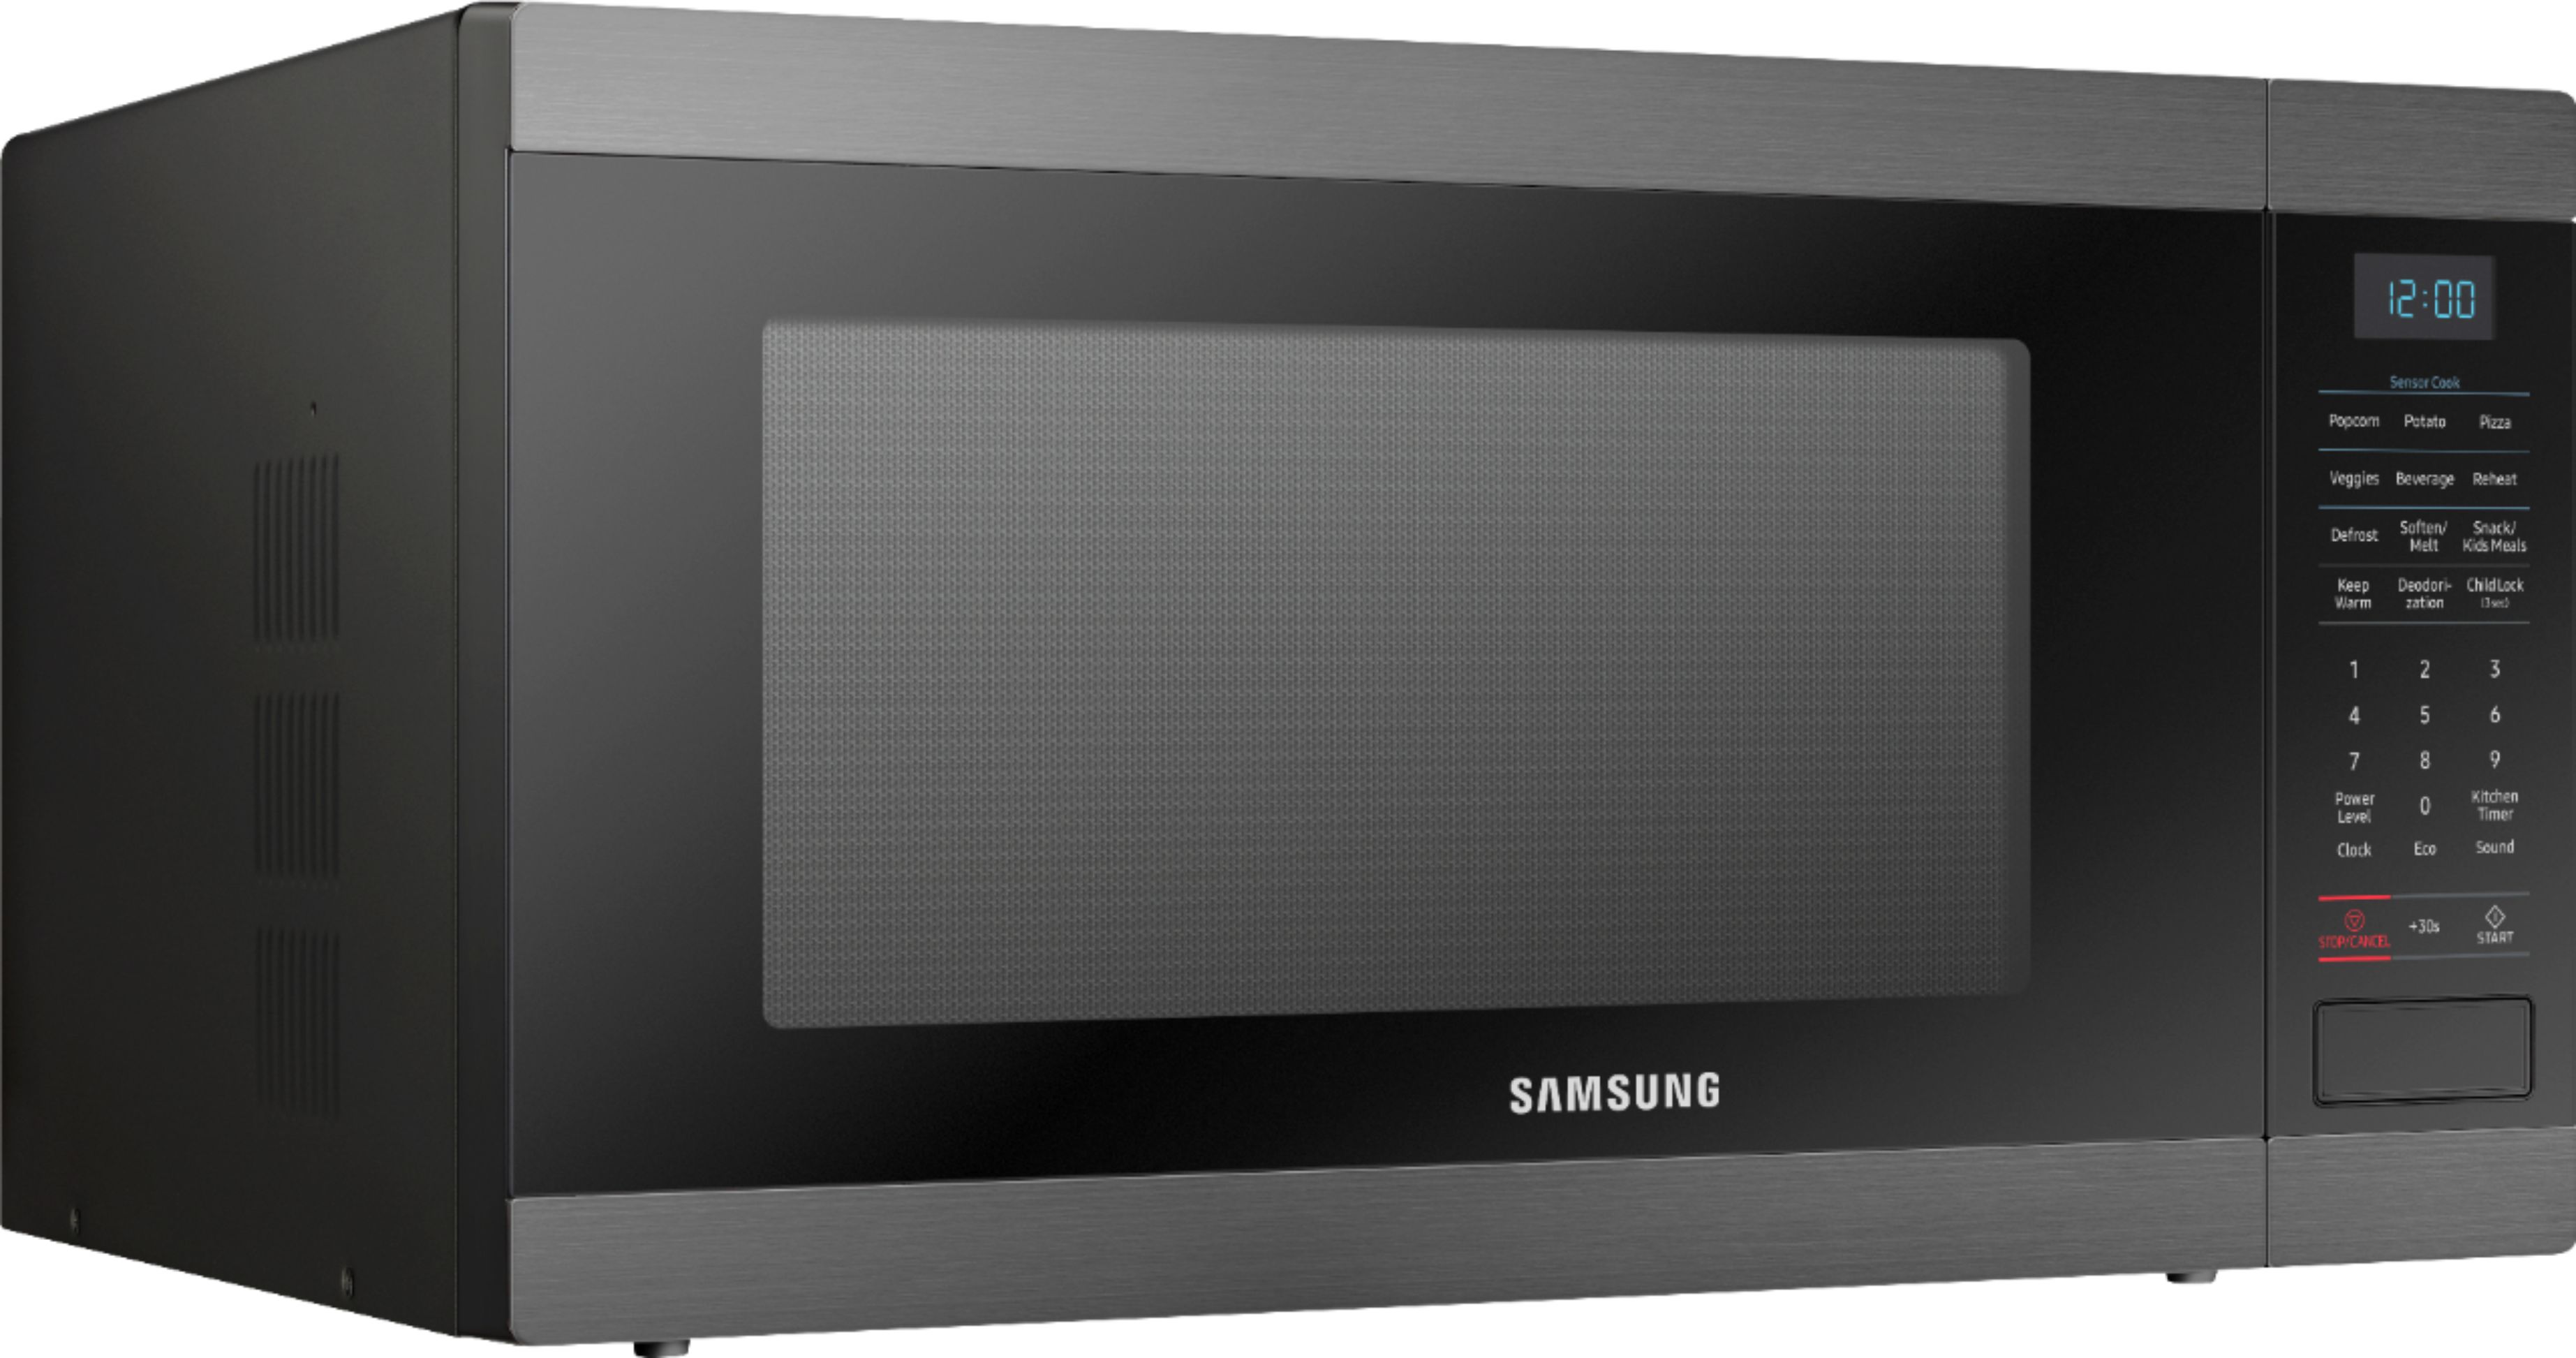 Angle View: Samsung - 1.9 Cu. Ft. Countertop Microwave with Sensor Cook - Black stainless steel